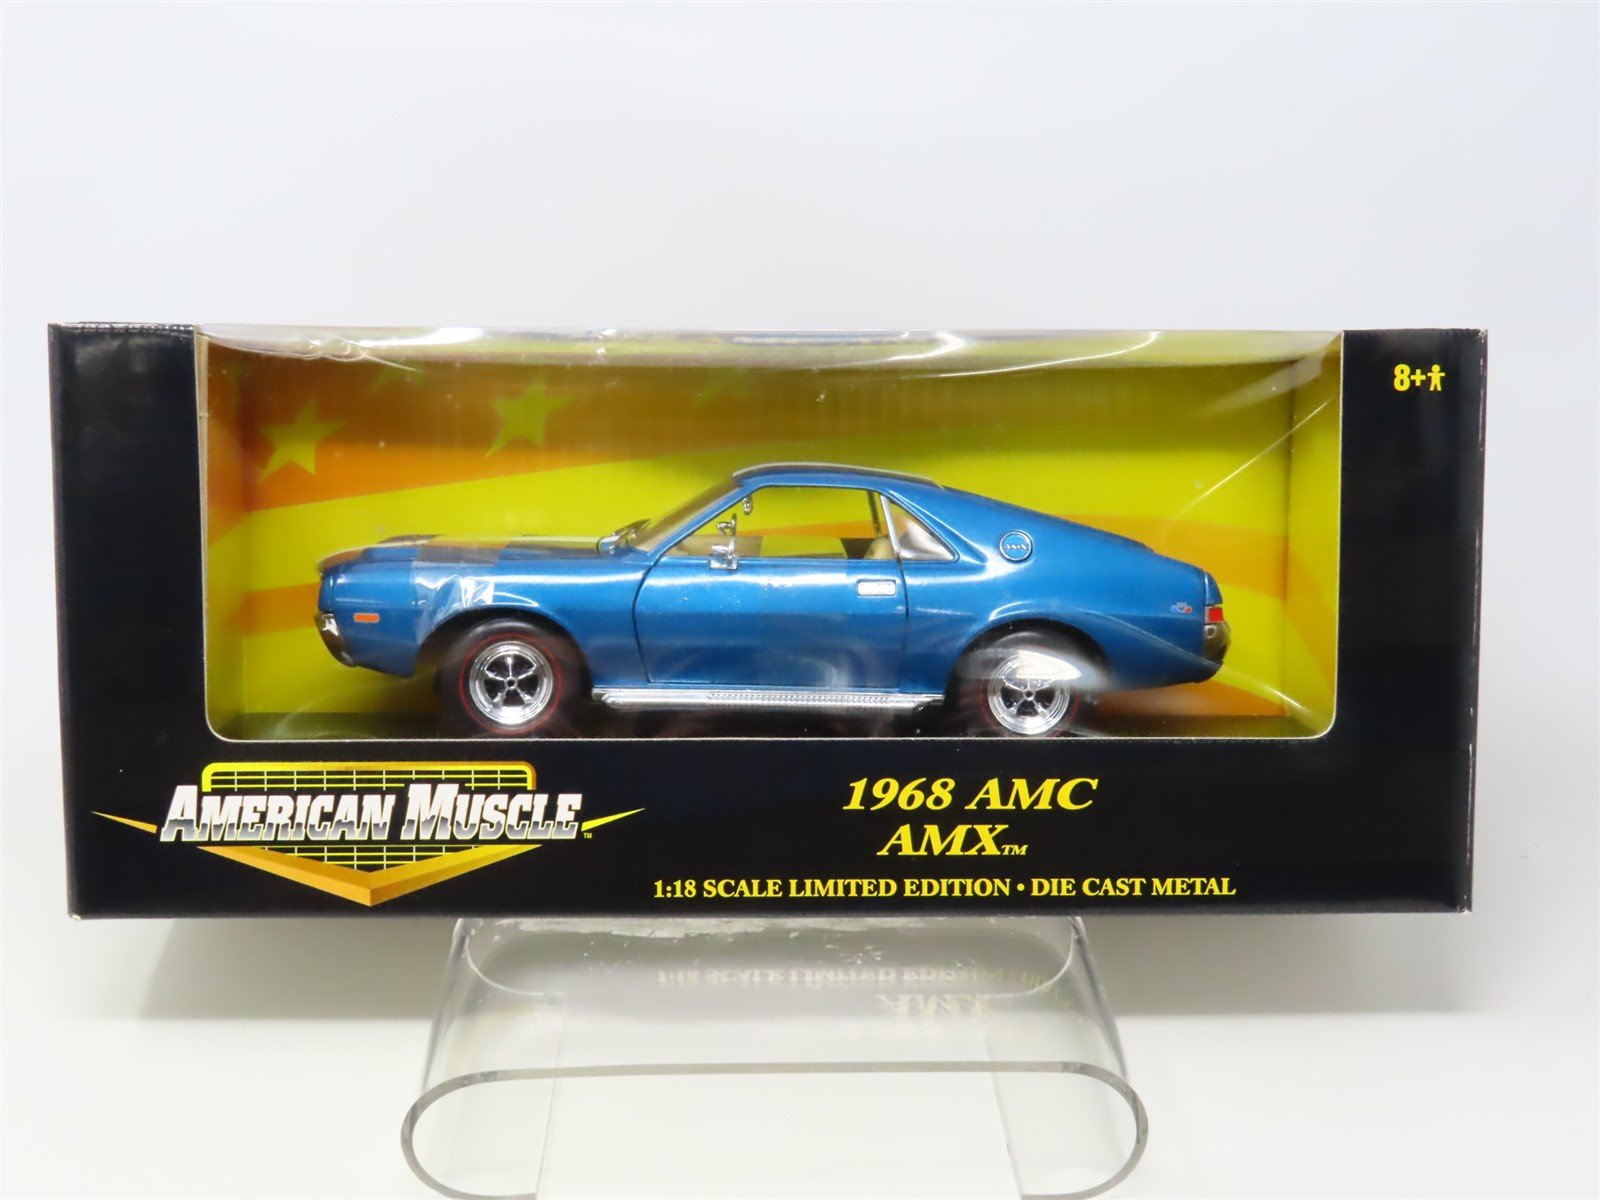 1:18 Scale ERTL American Muscle Limited Edition 32282 1968 AMC AMX